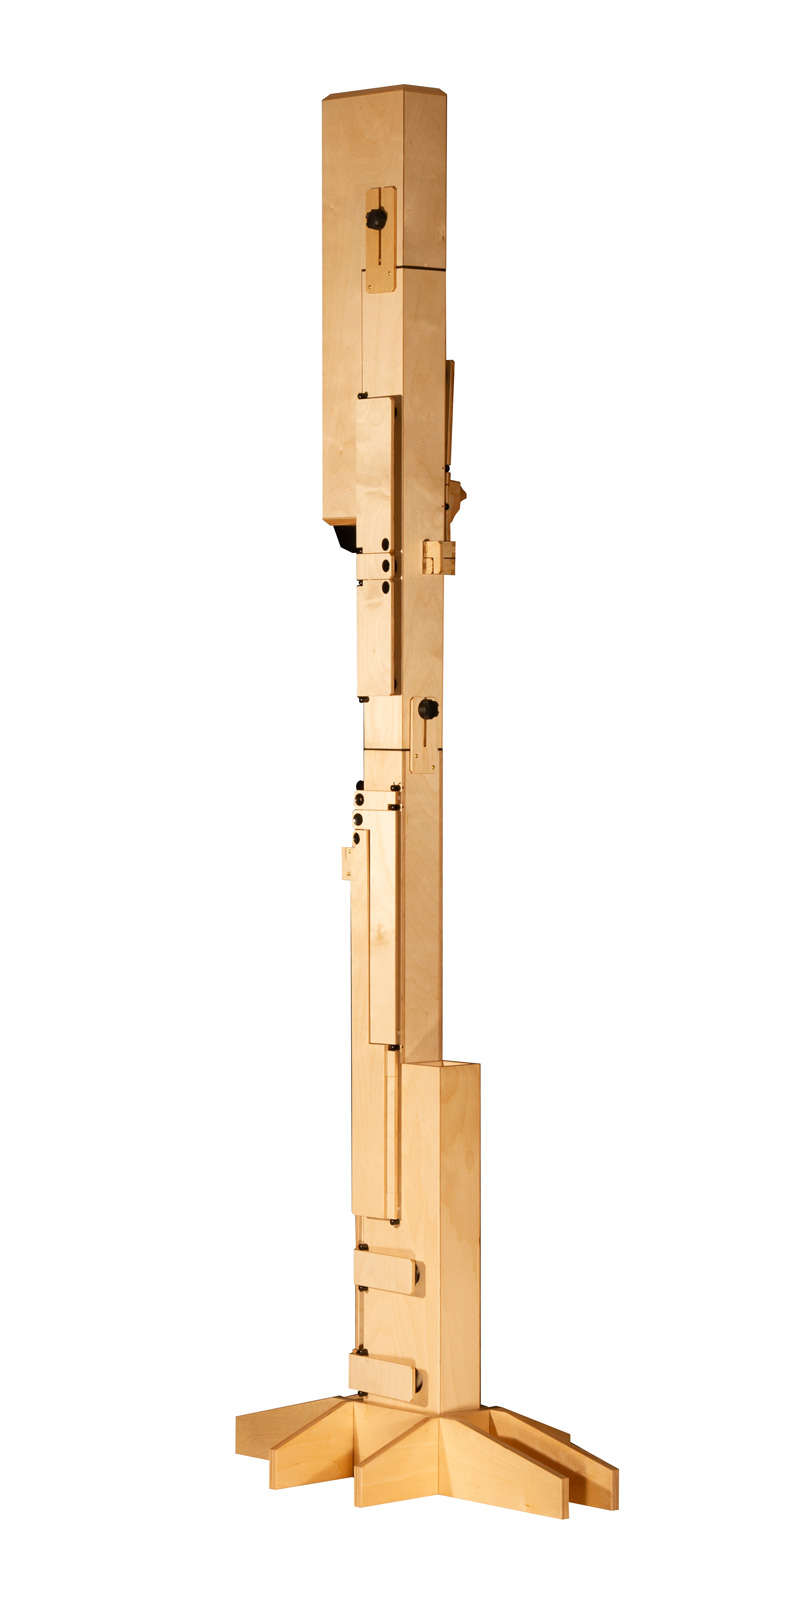 Paetzold by Kunath, subcontrabass in F, "Master", "Direct-Blow", 442 Hz, natural, birch plywood